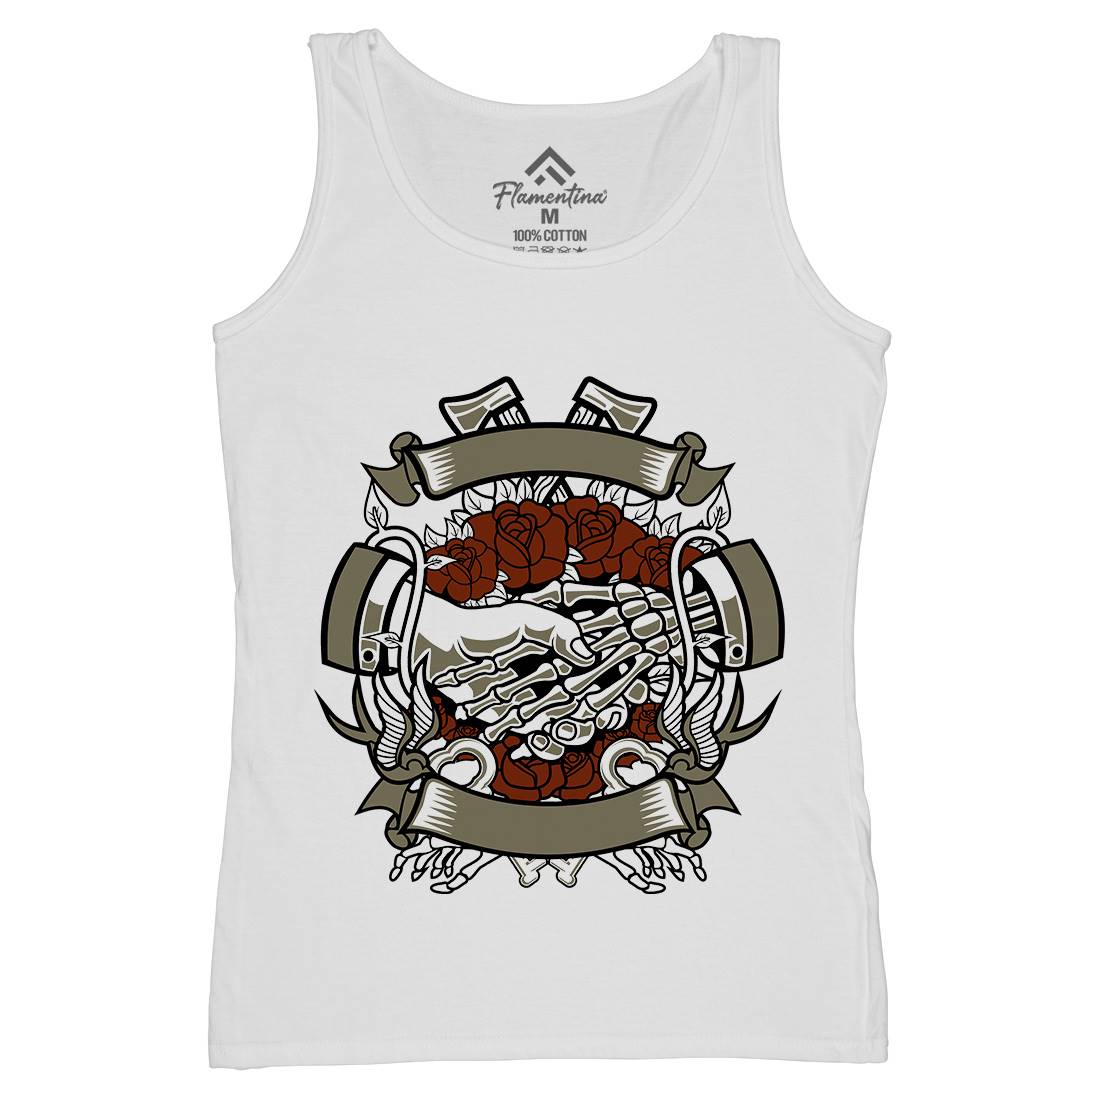 Otherside Womens Organic Tank Top Vest Religion A103